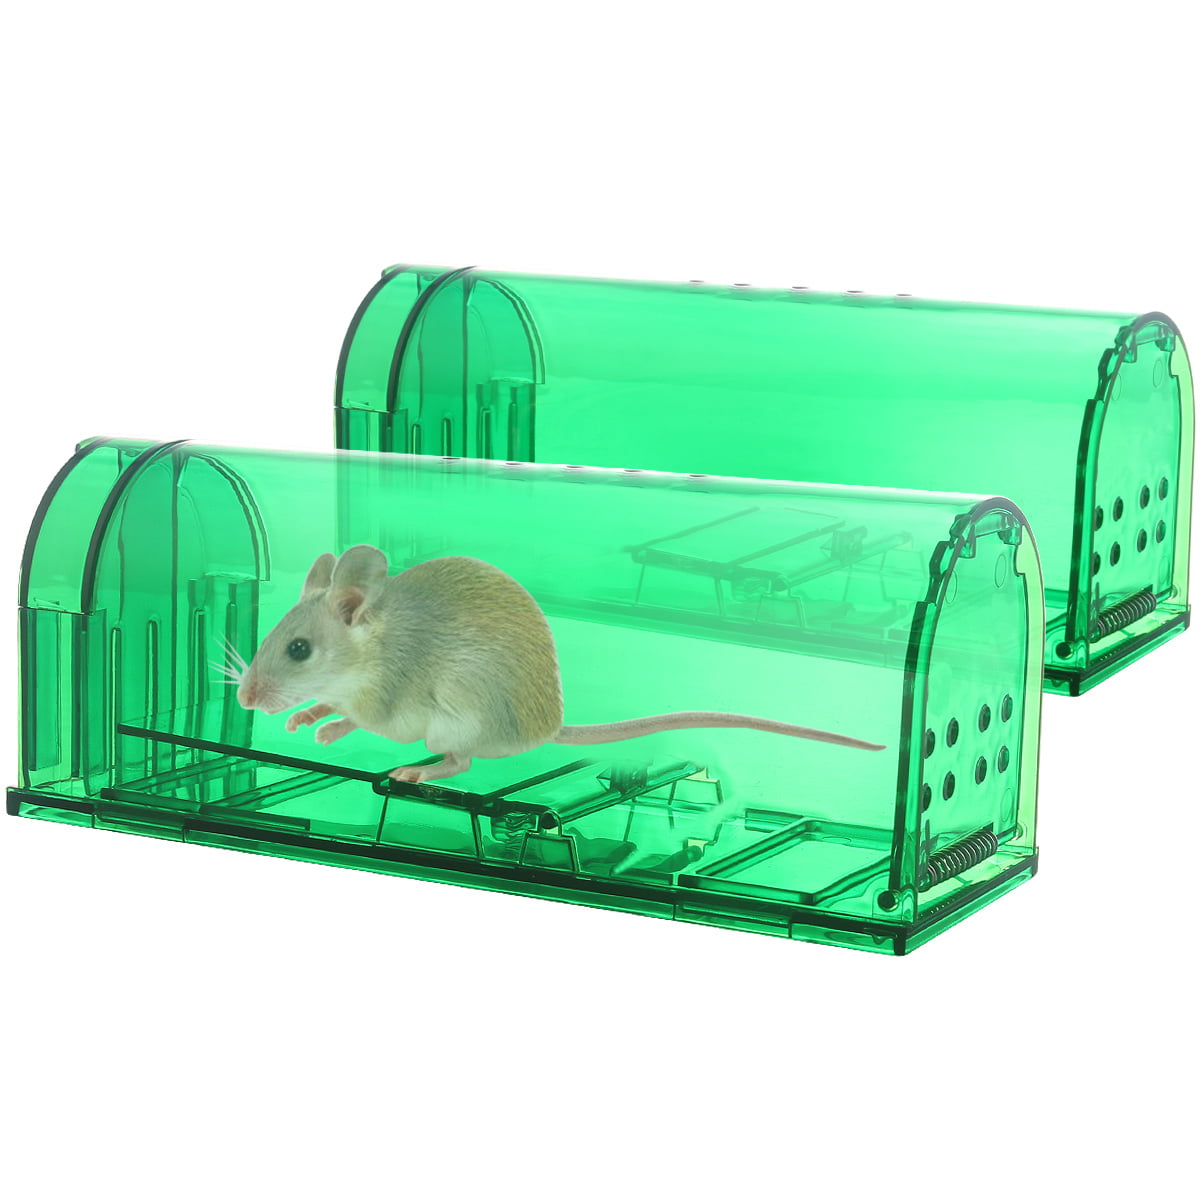 2Packs Wooden Mouse Mice Trap Reusable Rodent Traps Human Extra Strength 